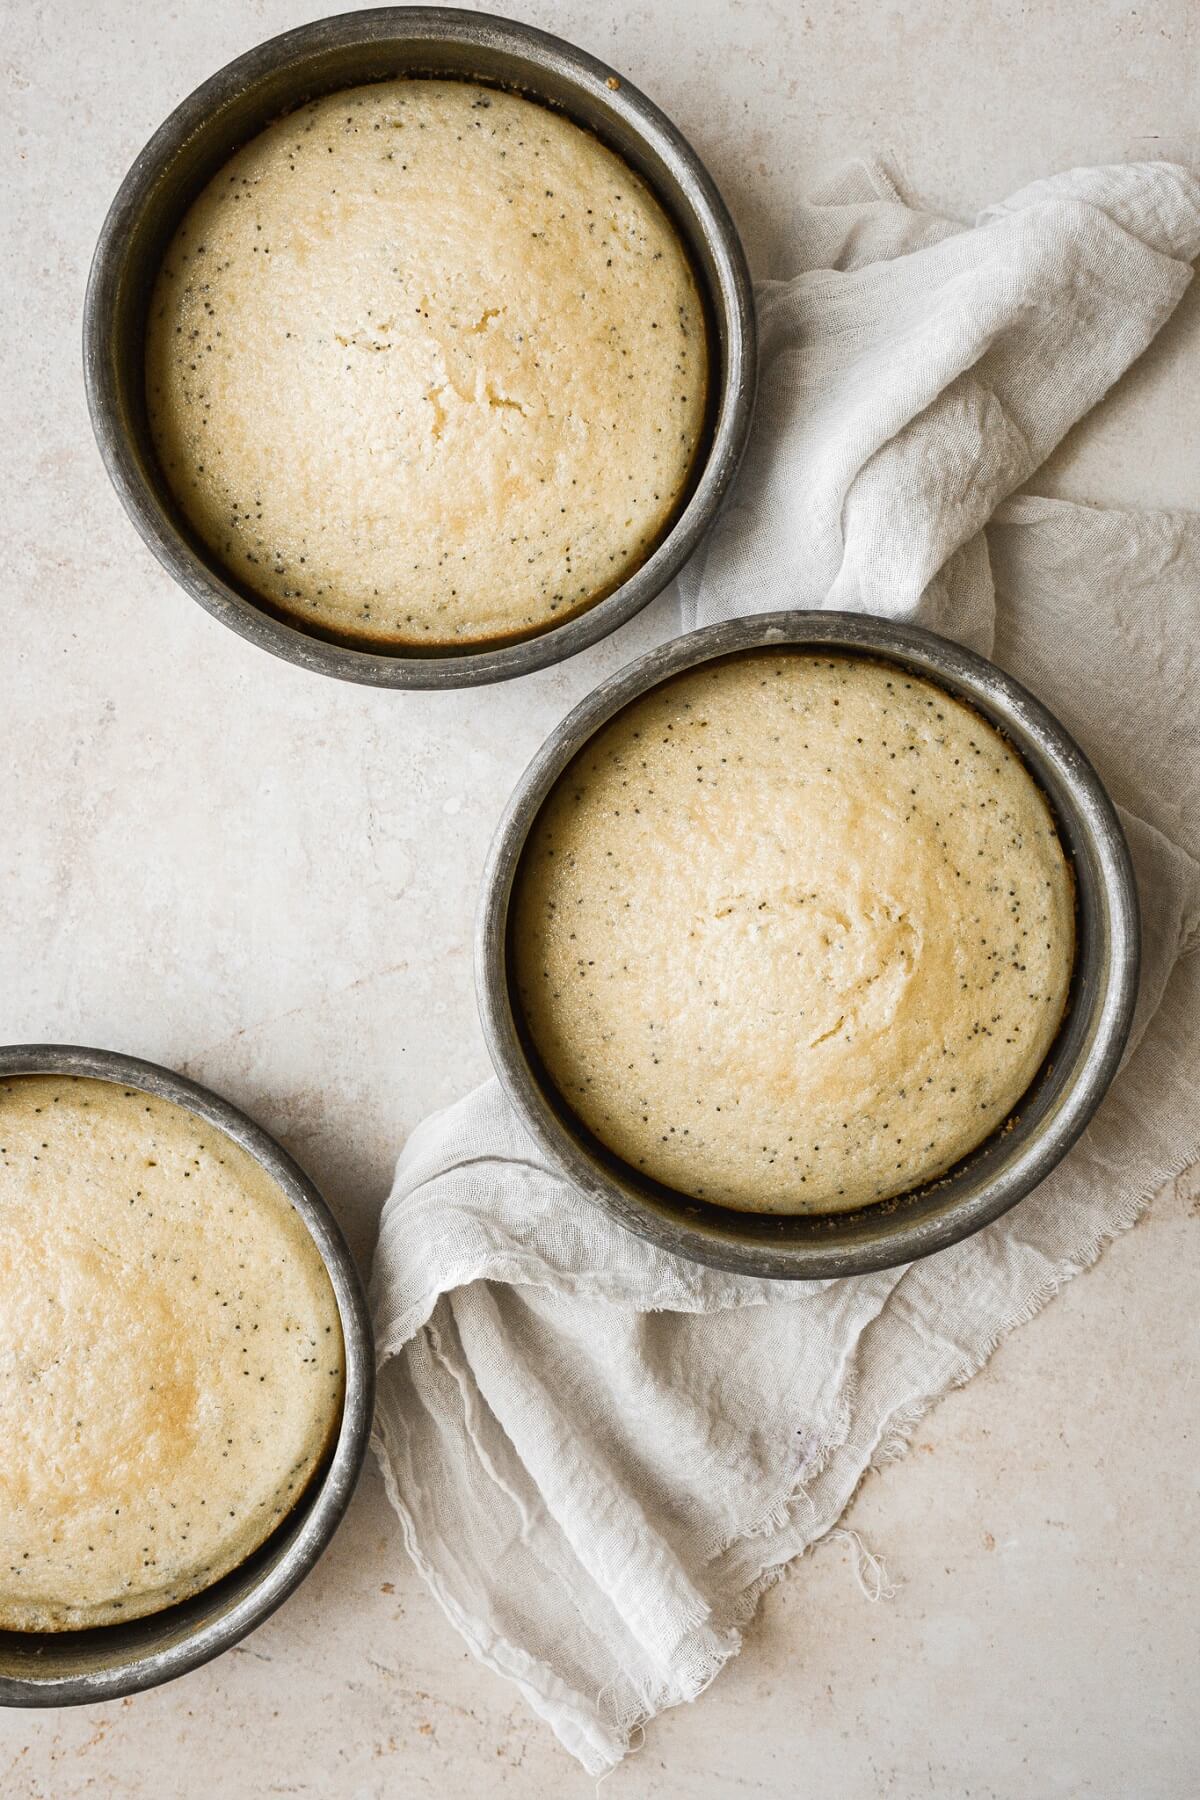 Almond poppy seed cakes cooling in cake pans.